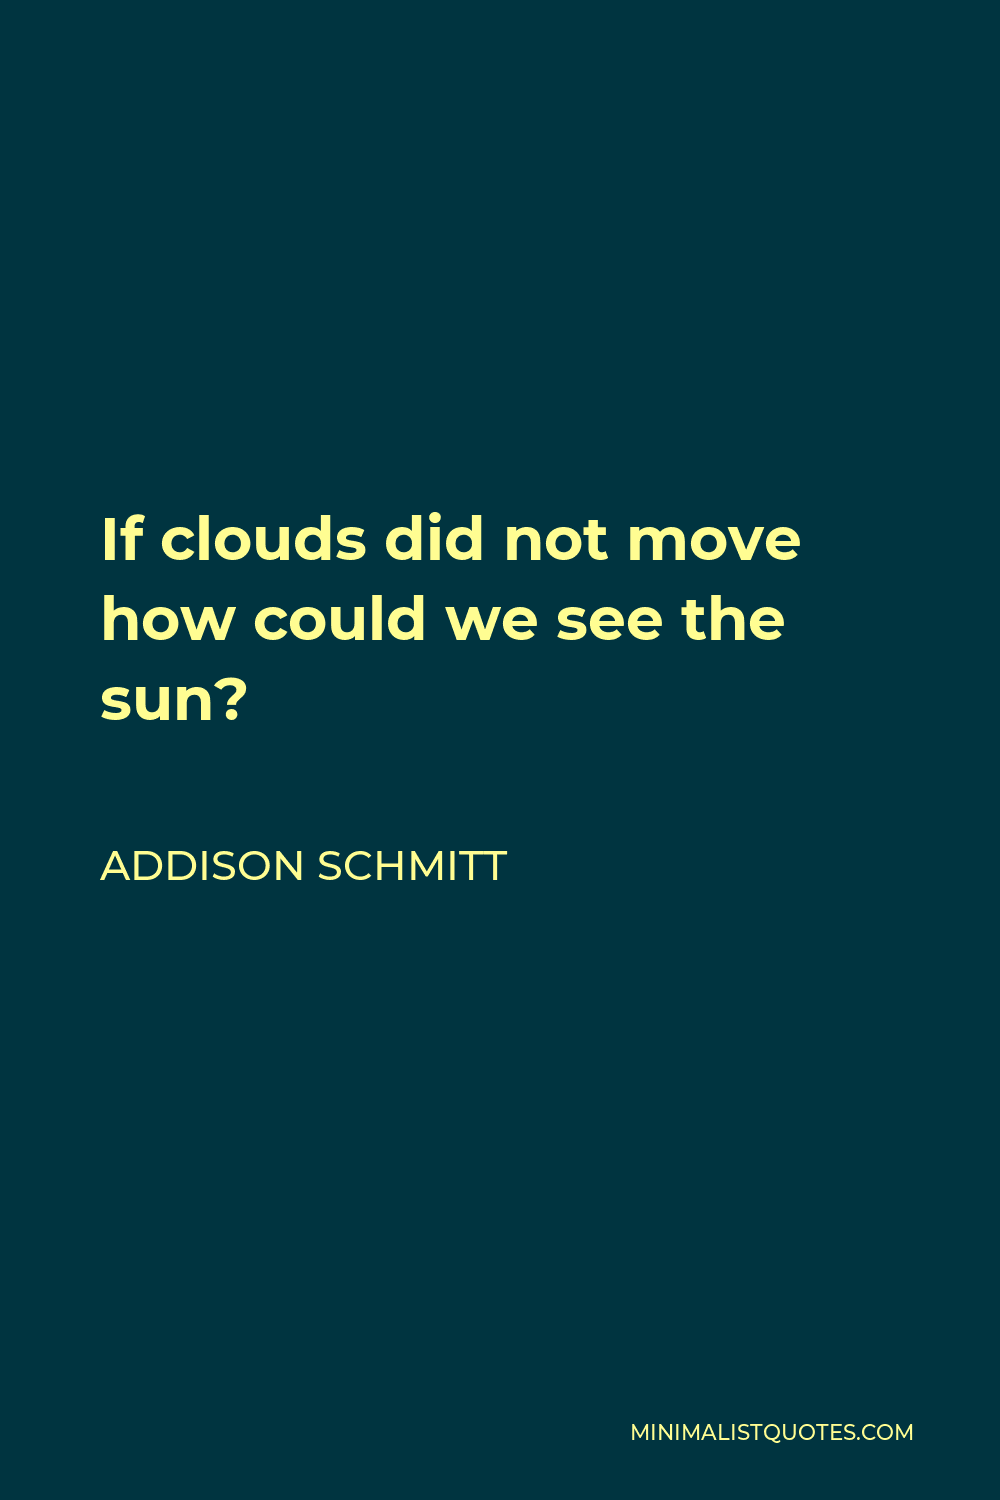 Addison Schmitt Quote - If clouds did not move how could we see the sun?